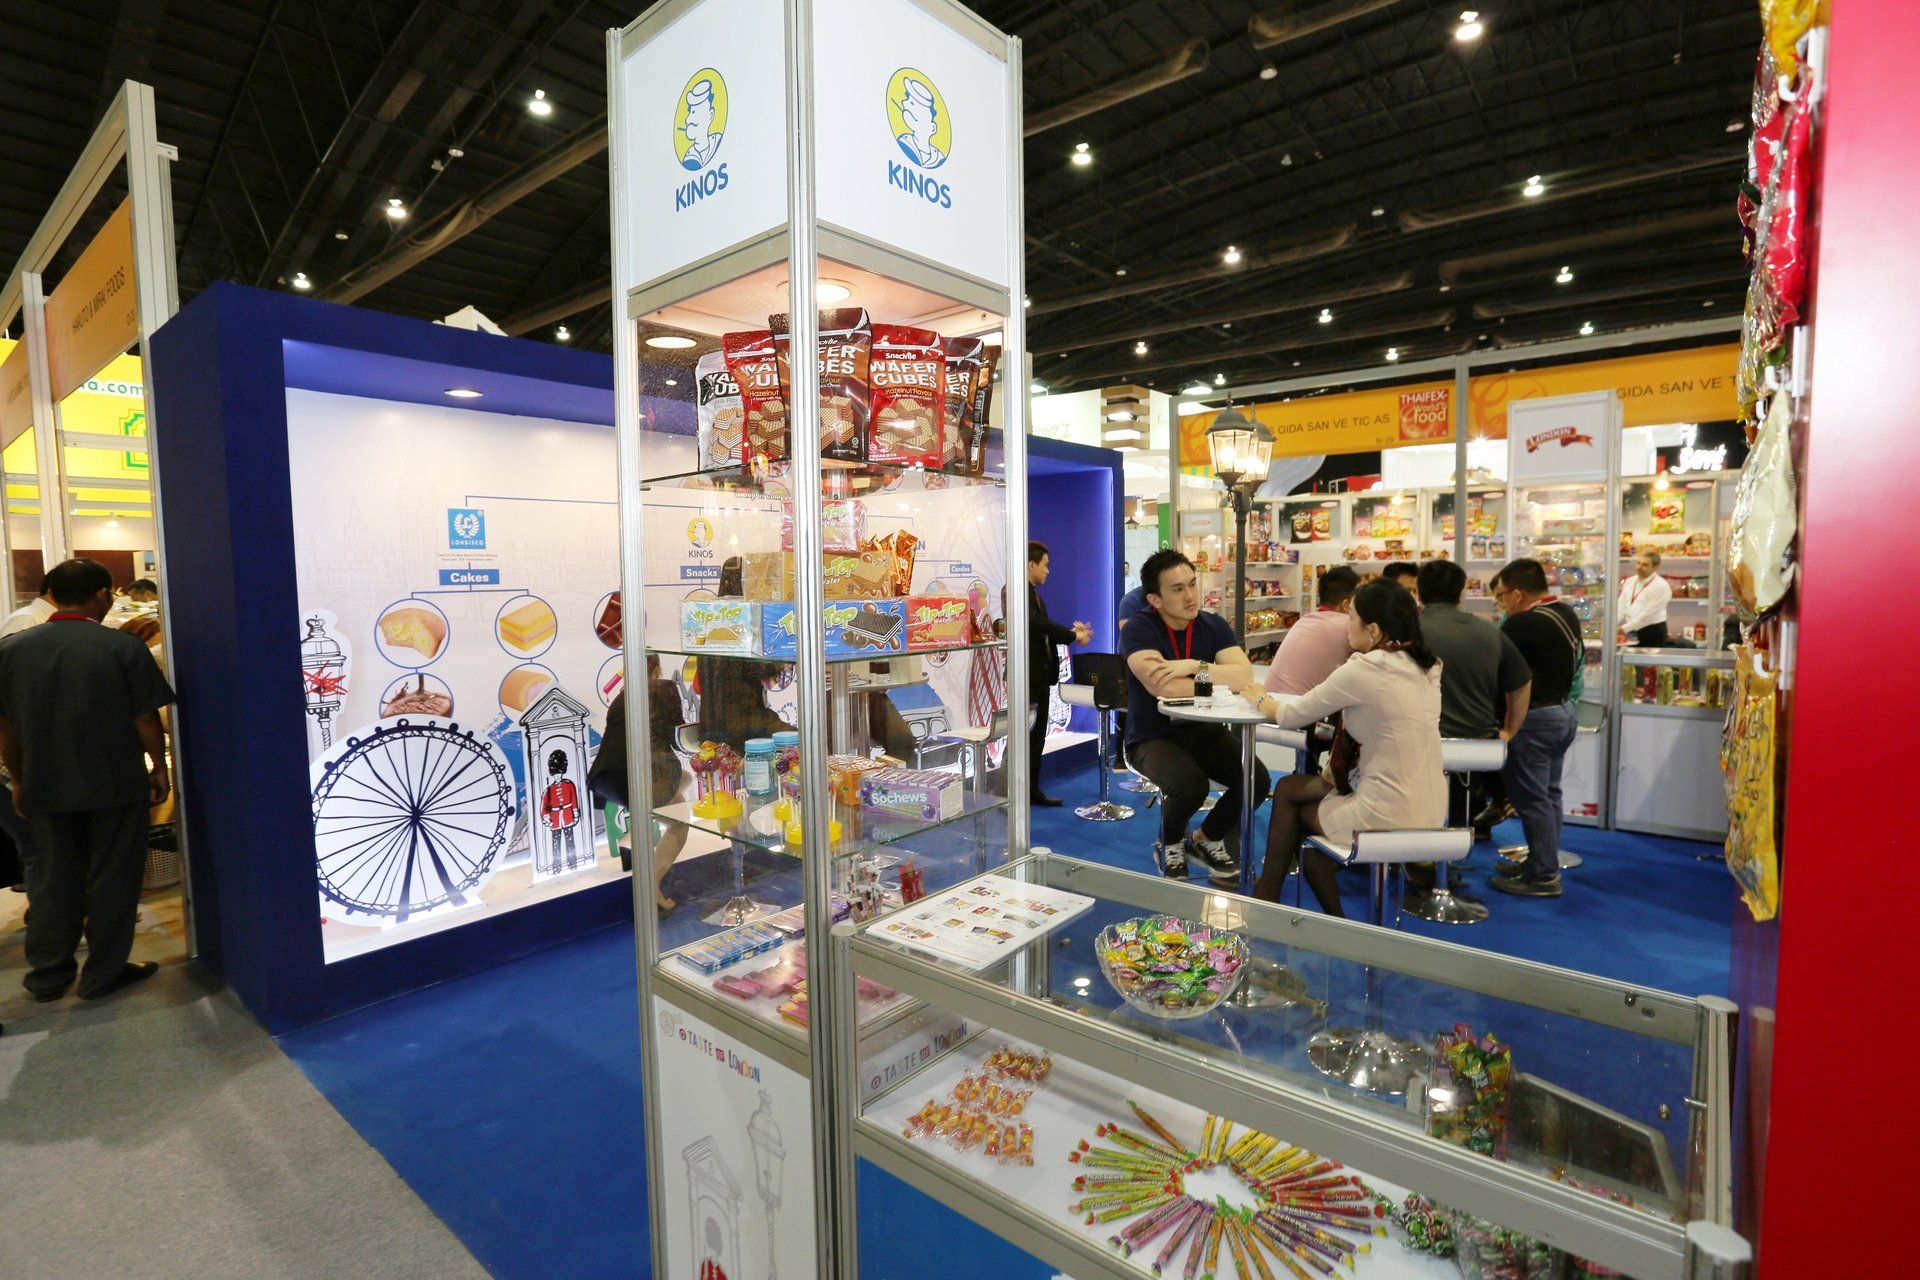 London Biscuits @ Thaifex 2015. Booth designed and built by Essential Global Fairs.